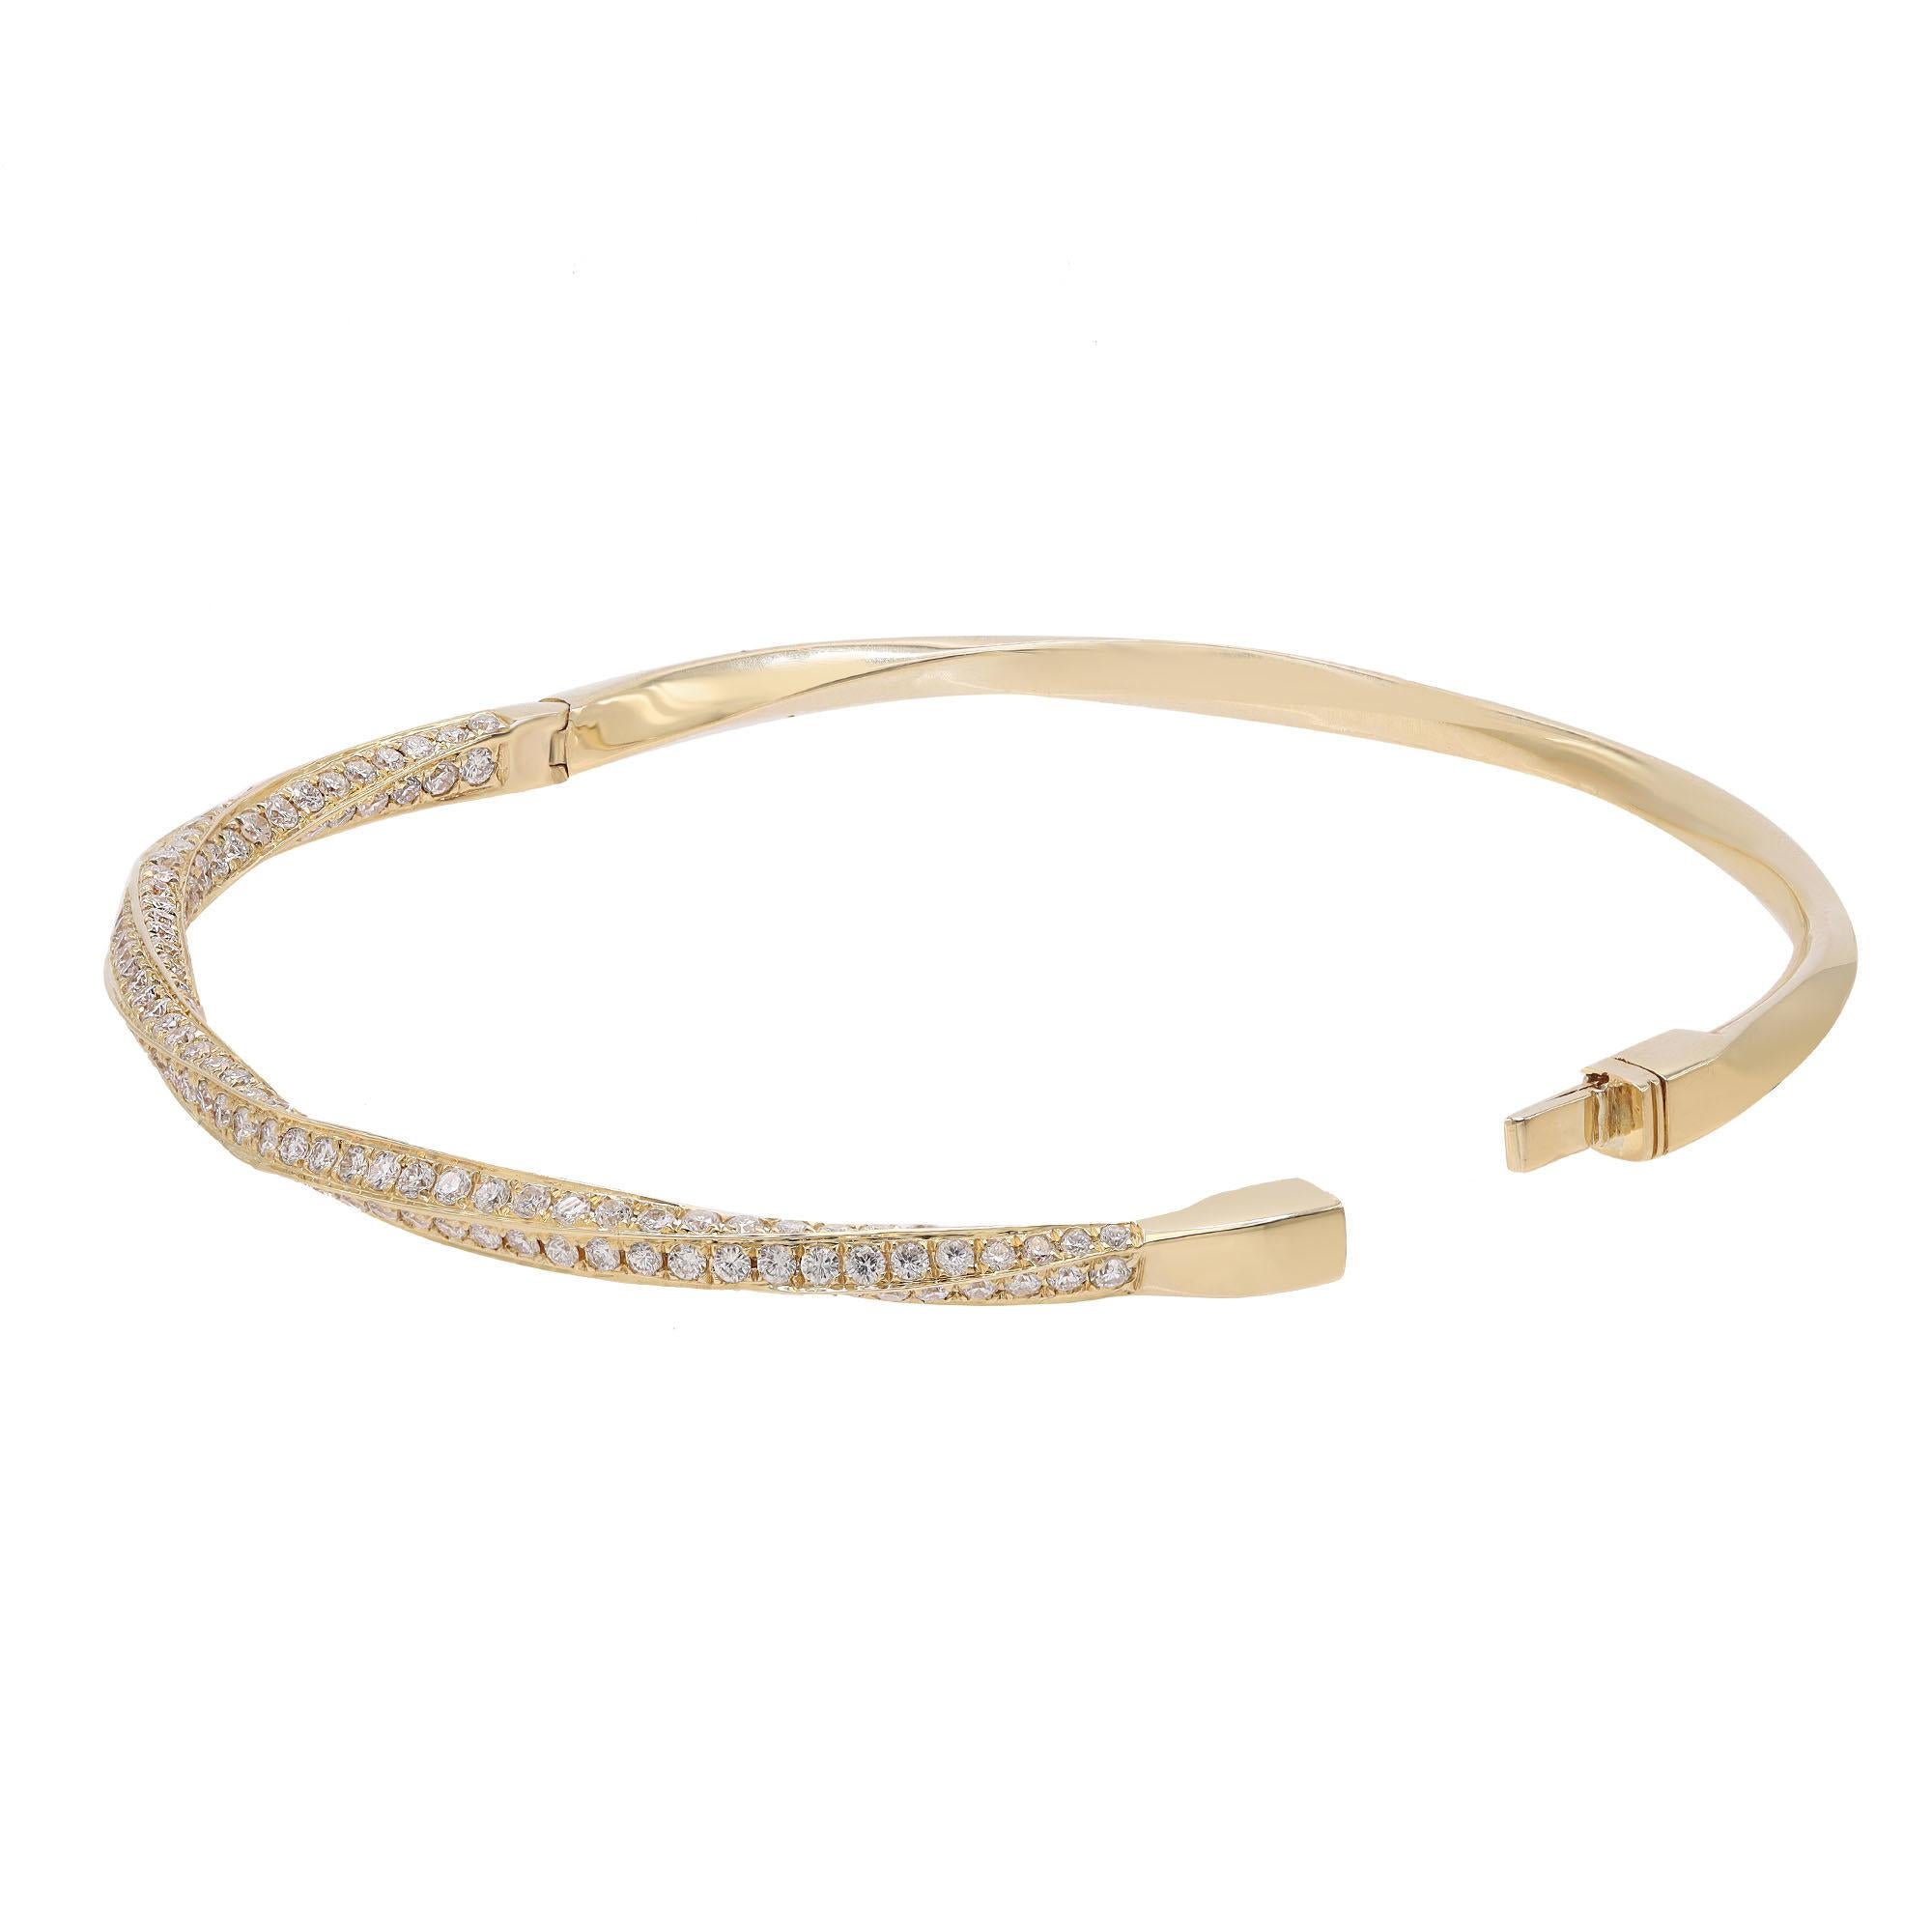 Rachel Koen Pave Set Round Cut Diamond Bangle Bracelet 18k Yellow Gold 2.05Cttw In New Condition For Sale In New York, NY